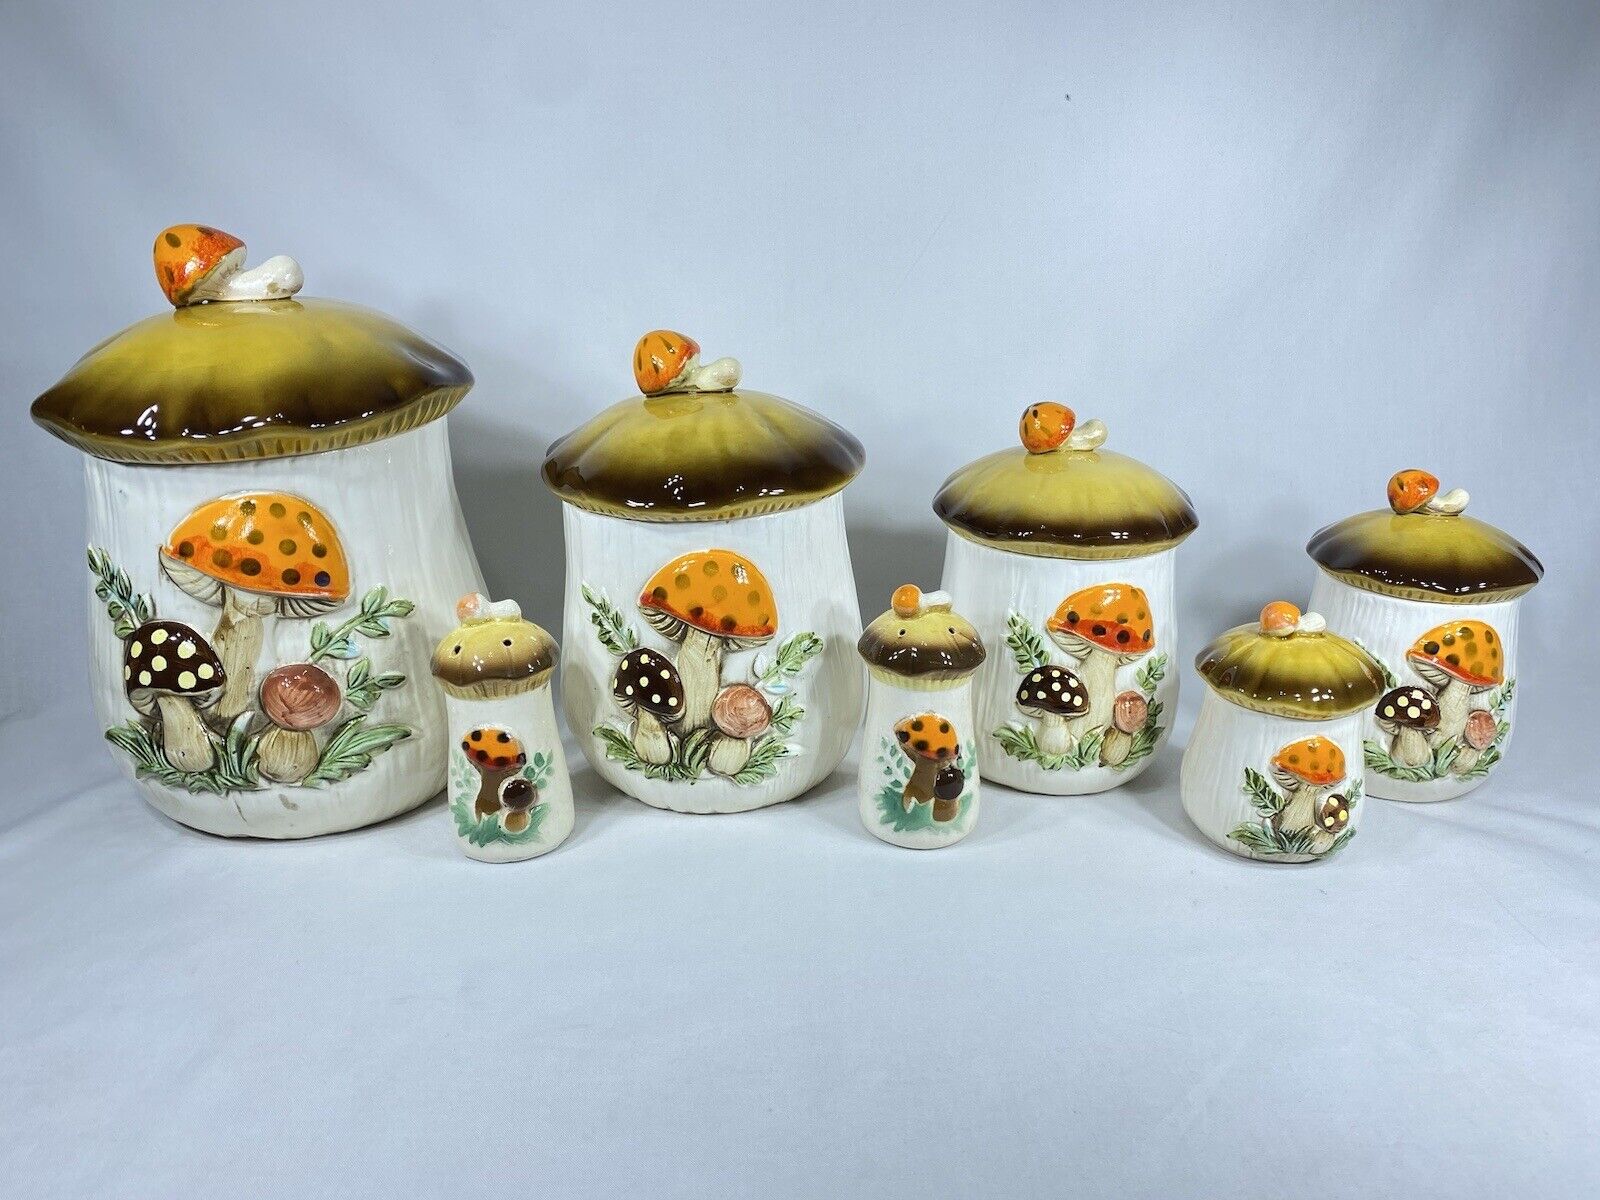 Vintage 1970’s Japan Merry Mushroom 5 Pc Complete Canister Set W/ S & P Shakers